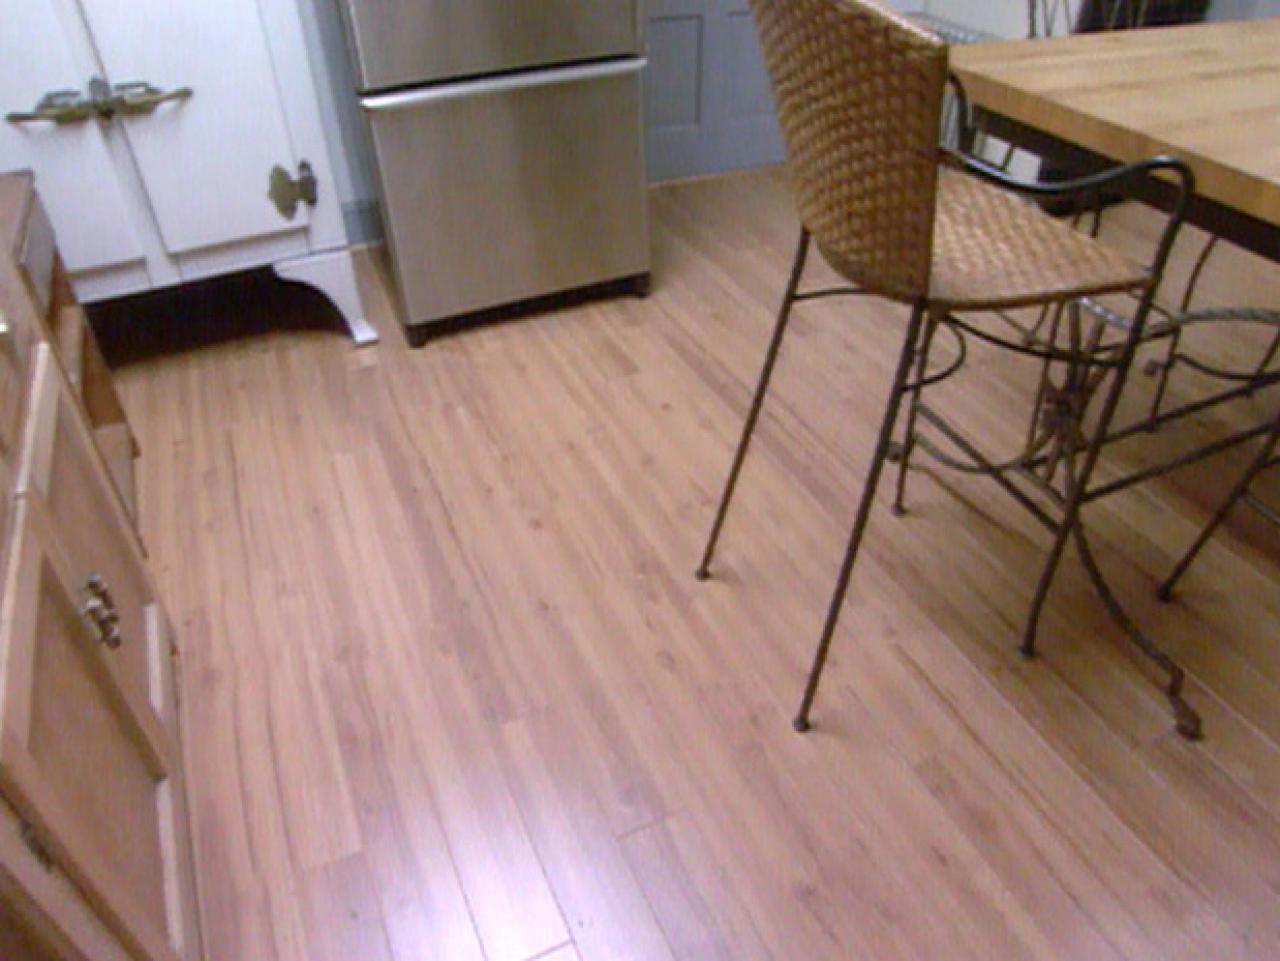 How To Install Laminate Flooring, How To Install Laminate Flooring Around Kitchen Island